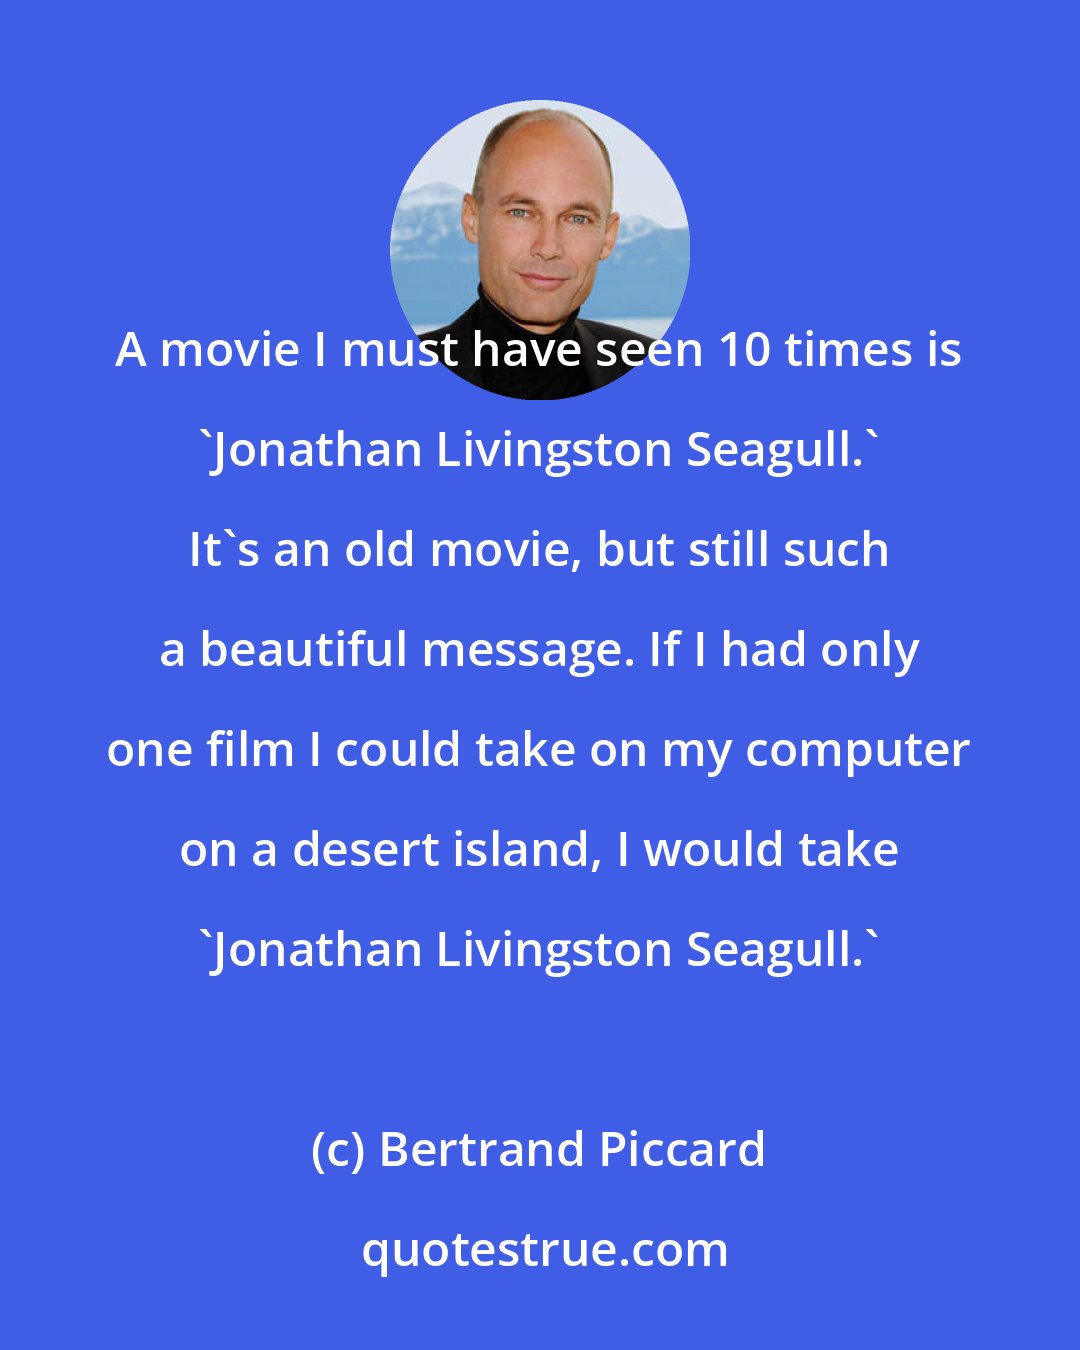 Bertrand Piccard: A movie I must have seen 10 times is 'Jonathan Livingston Seagull.' It's an old movie, but still such a beautiful message. If I had only one film I could take on my computer on a desert island, I would take 'Jonathan Livingston Seagull.'